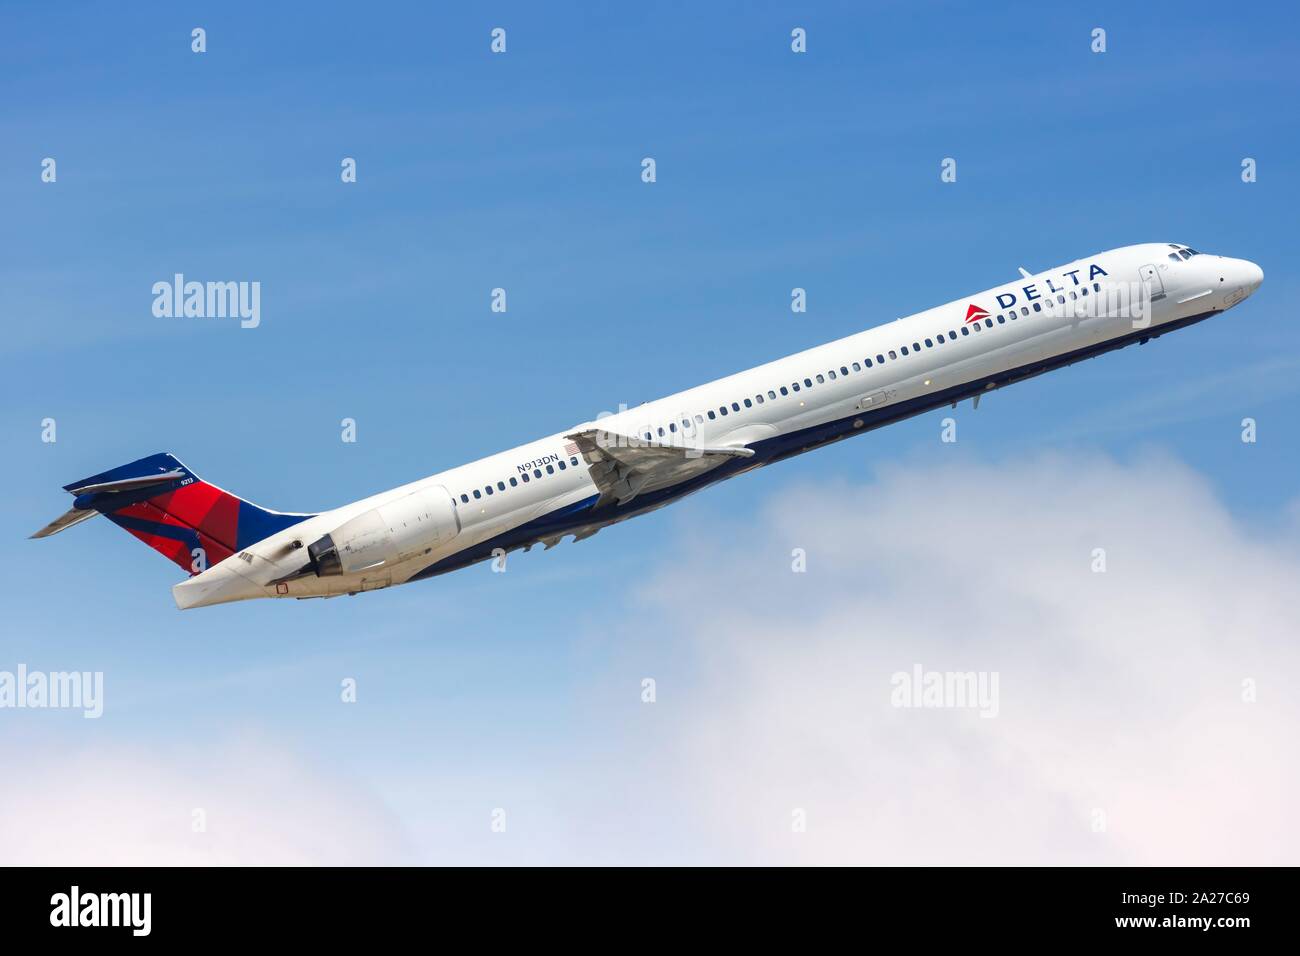 Fort Lauderdale, Florida – April 6, 2019: Delta Air Lines McDonnell Douglas MD-90 airplane at Fort Lauderdale airport (FLL) in Florida. | usage worldwide Stock Photo